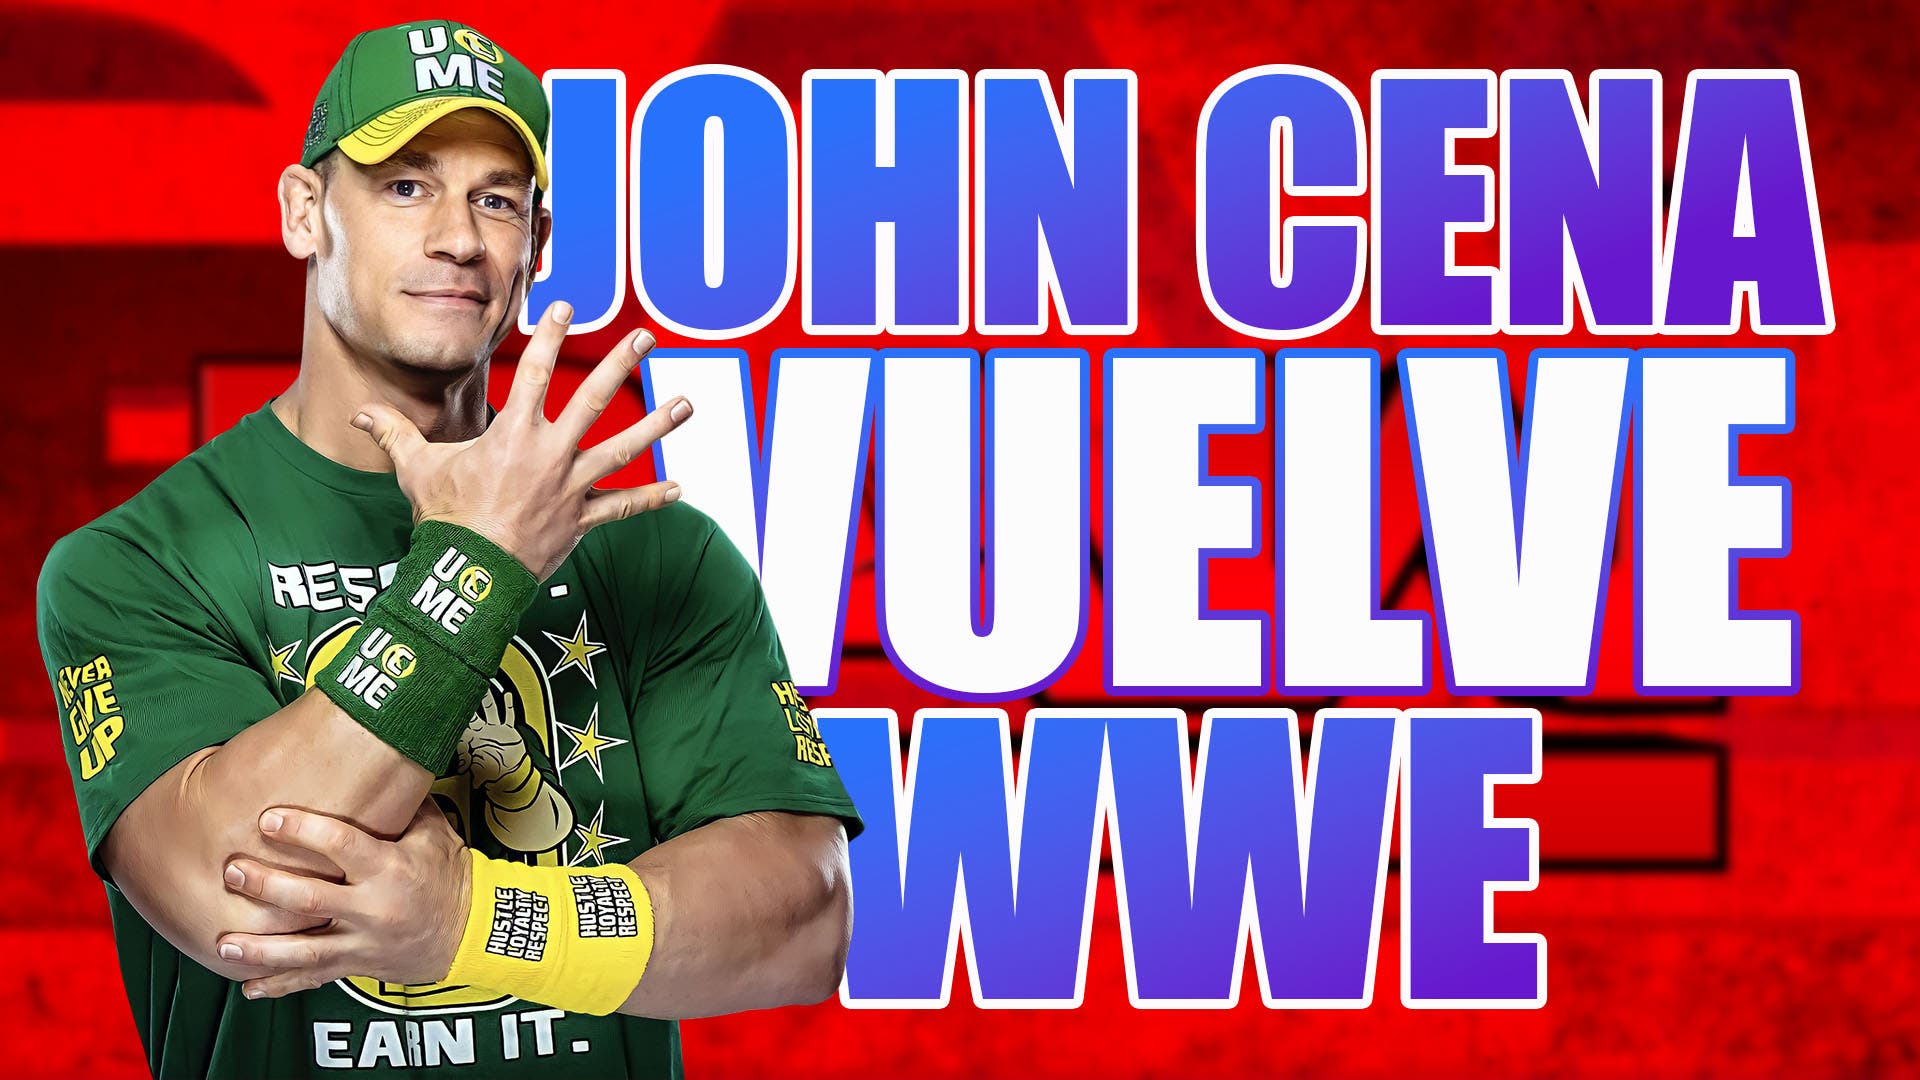 John Cena Returns to WWE: All About His Return